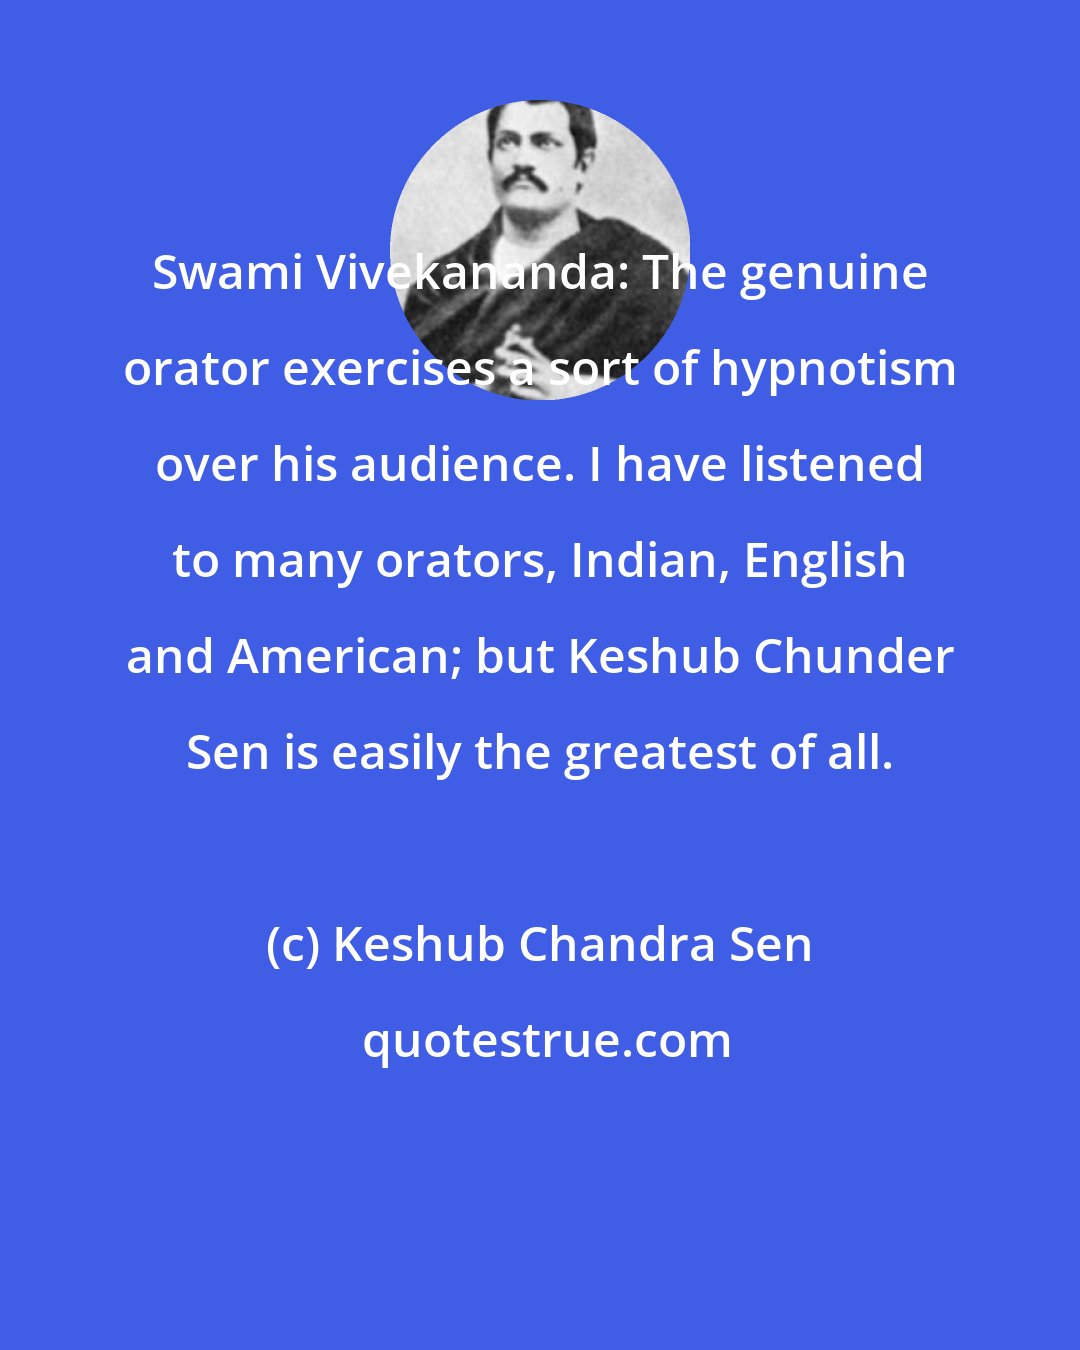 Keshub Chandra Sen: Swami Vivekananda: The genuine orator exercises a sort of hypnotism over his audience. I have listened to many orators, Indian, English and American; but Keshub Chunder Sen is easily the greatest of all.